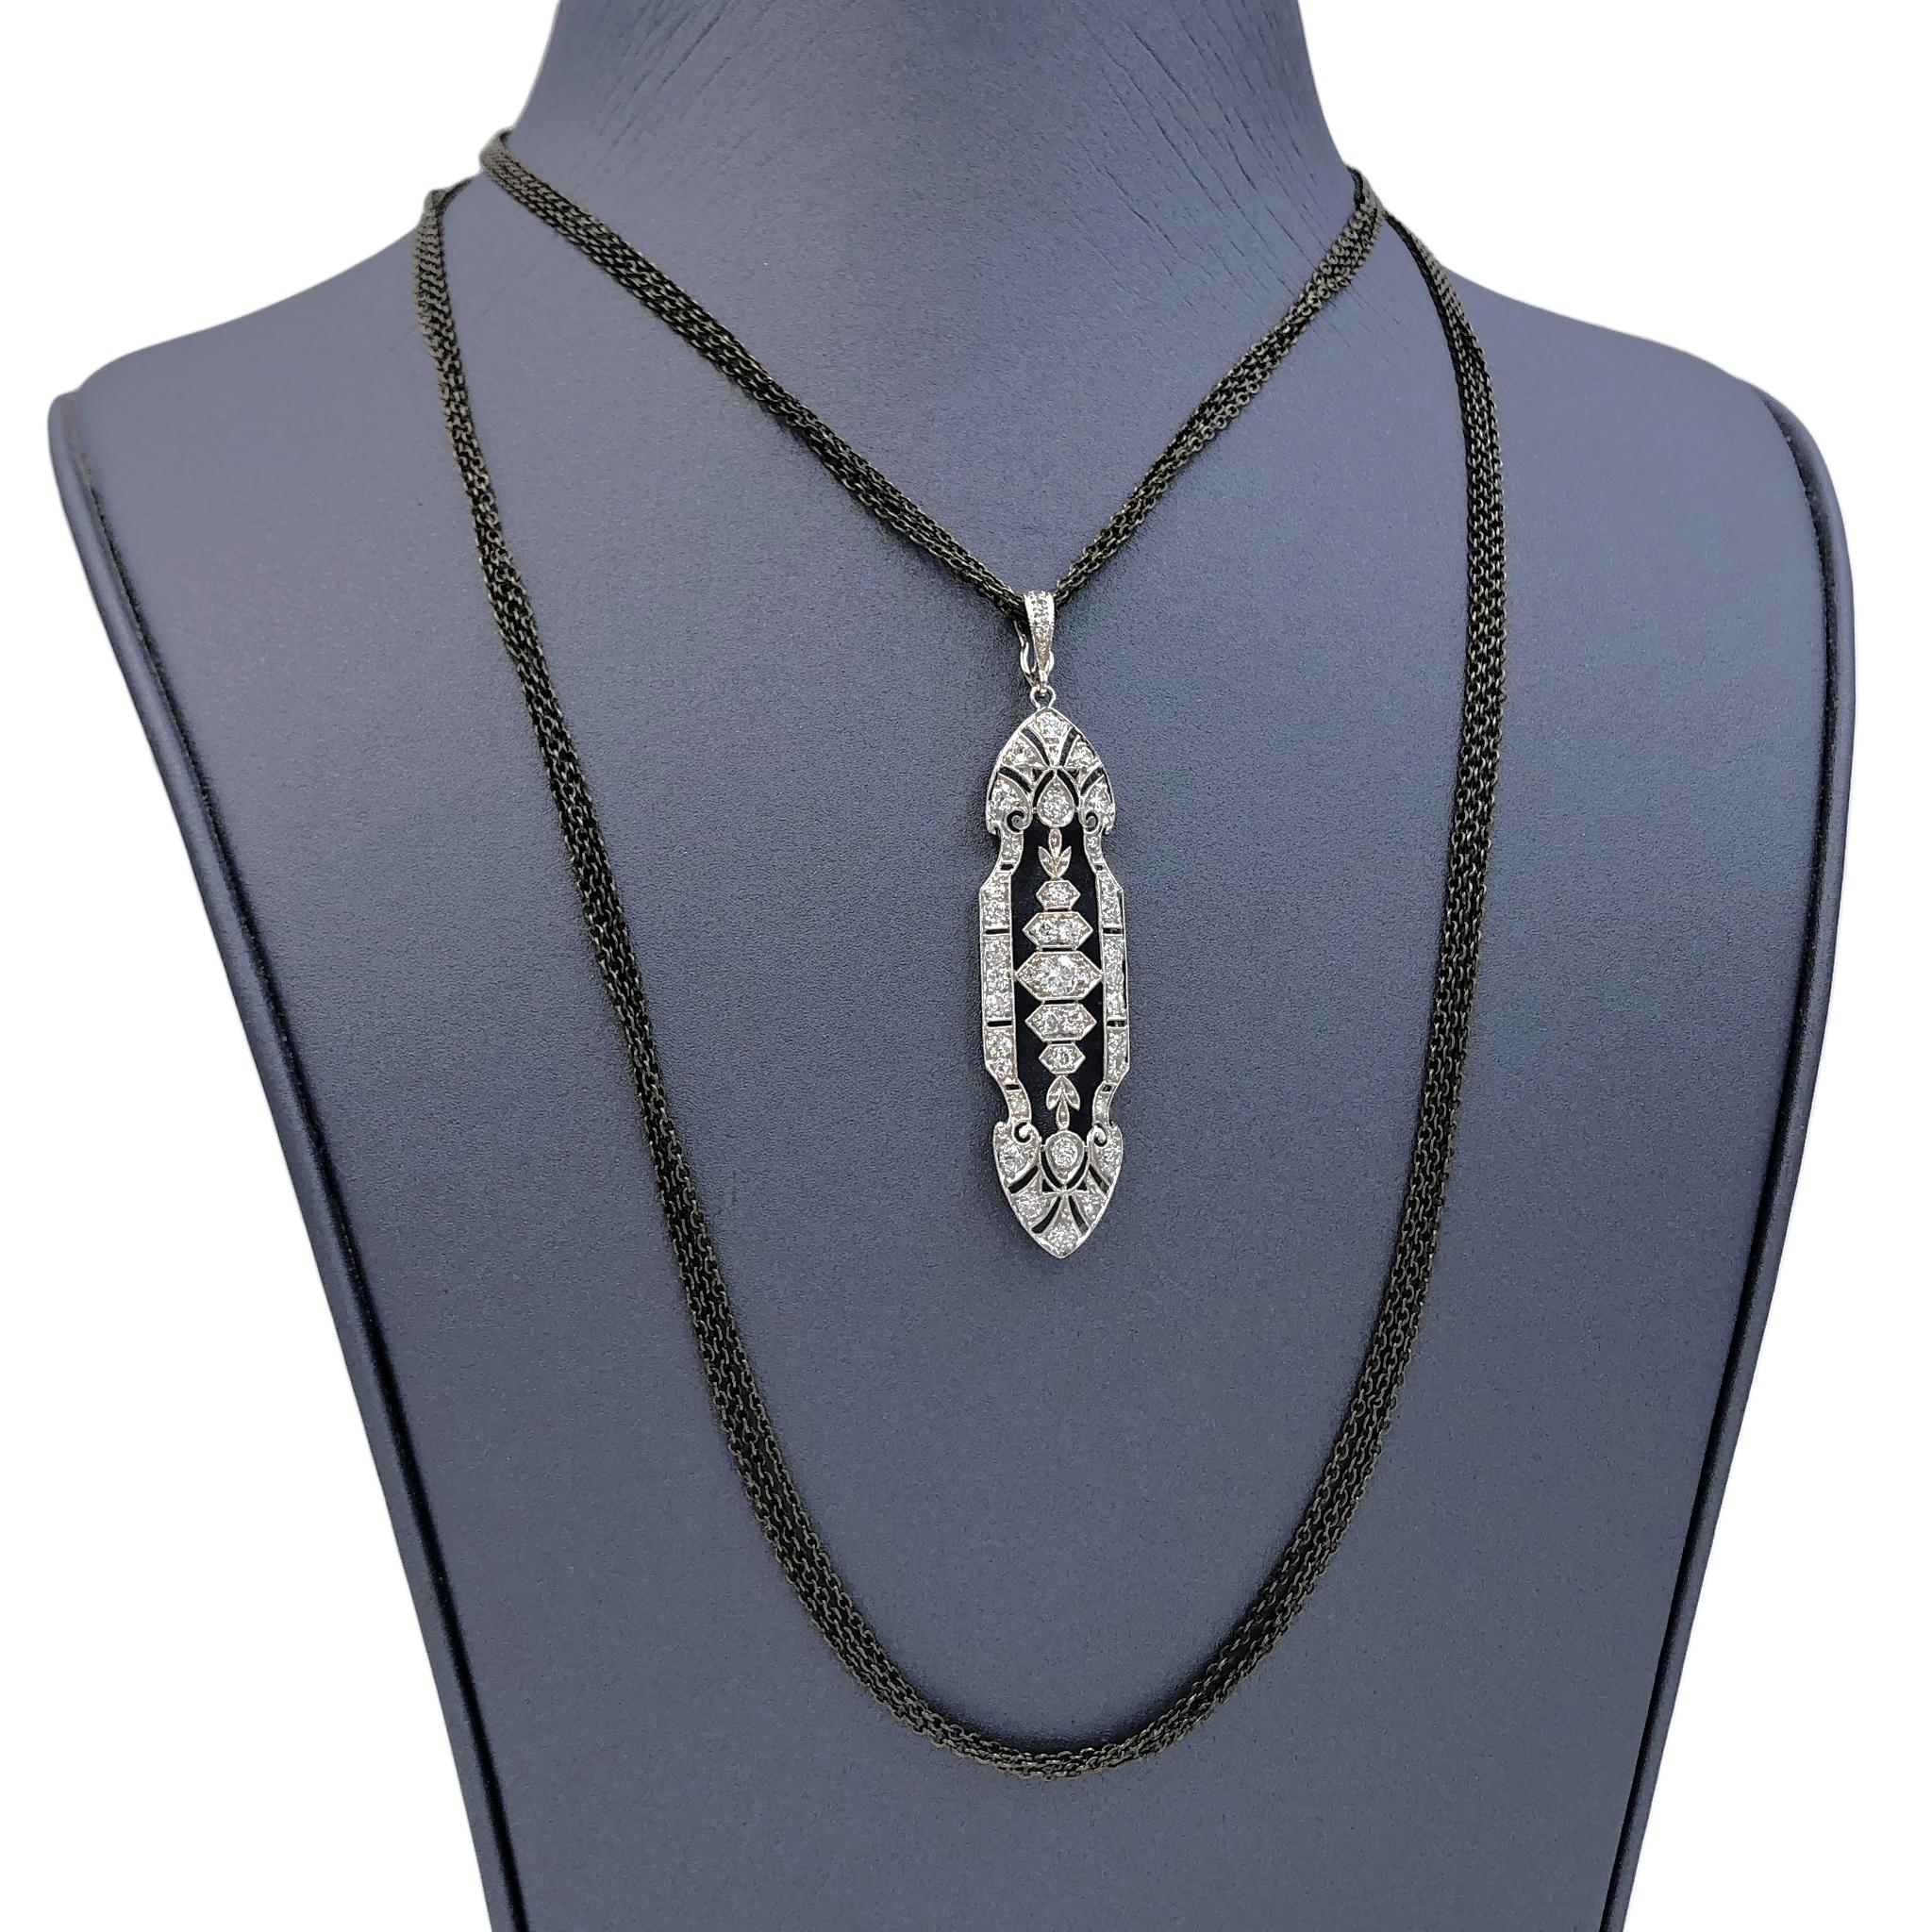 One of a Kind Art Deco Style Open Work Pendant Necklace by jewelry designer Julie Romanenko (Just Jules) in platinum and 14k white gold featuring 1.00 carat of shimmering round full-cut white diamonds and attached to an oxidized sterling silver